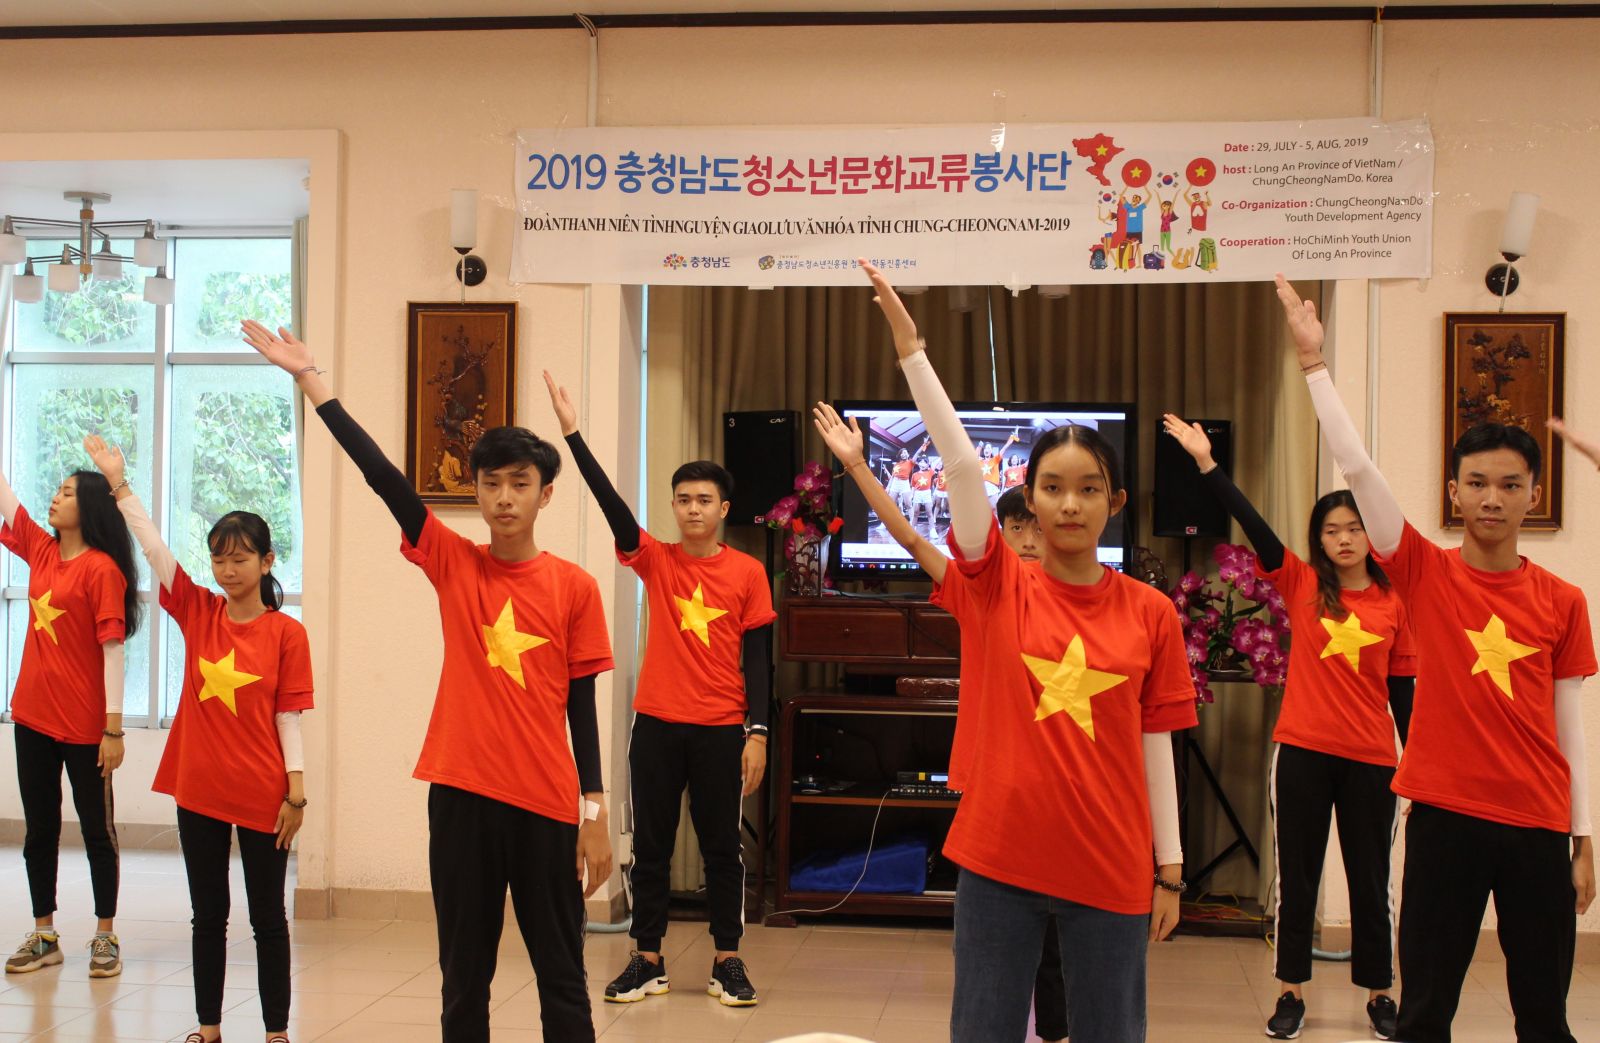 Union members and youths of Tan Tru district performed a musical farewell to the youth and teenagers of Chungcheongnam province after 6 days working in Long An